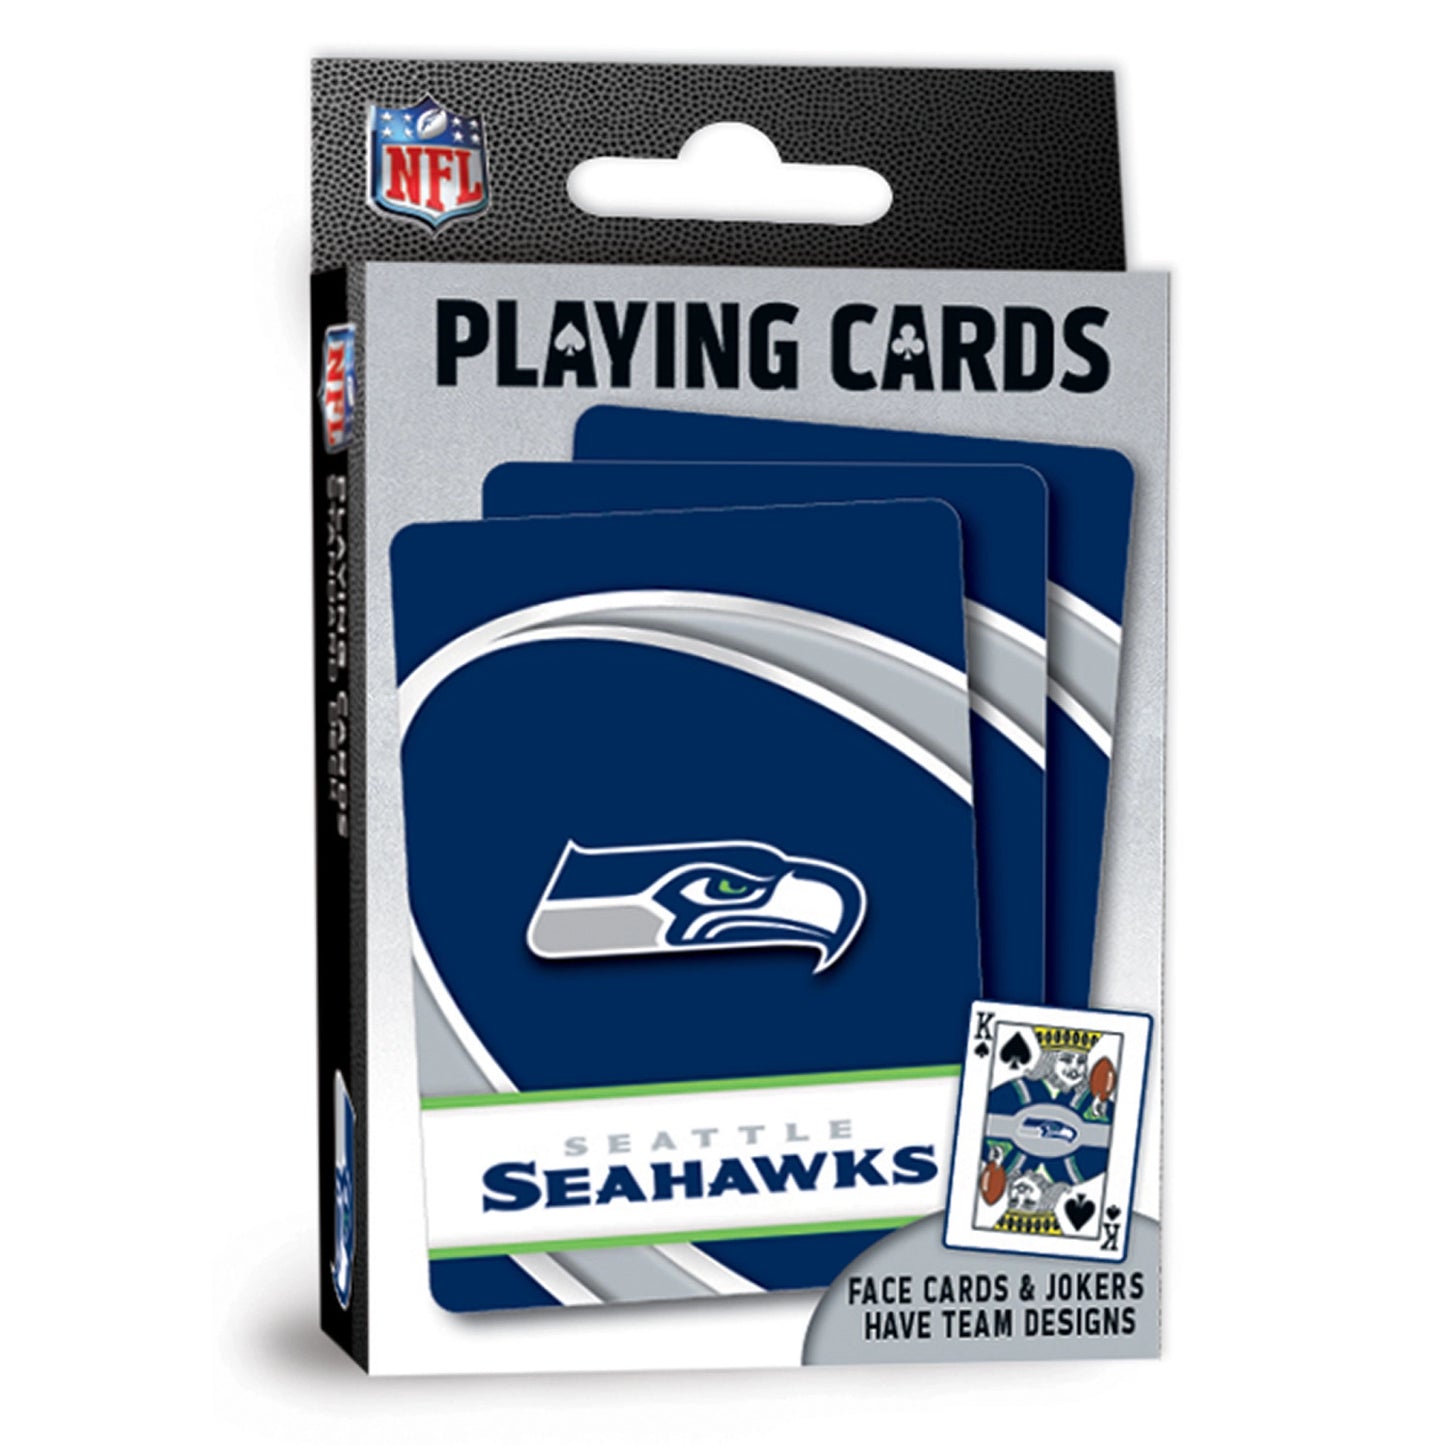 Seattle Seahawks Playing Cards - Go Hawks!